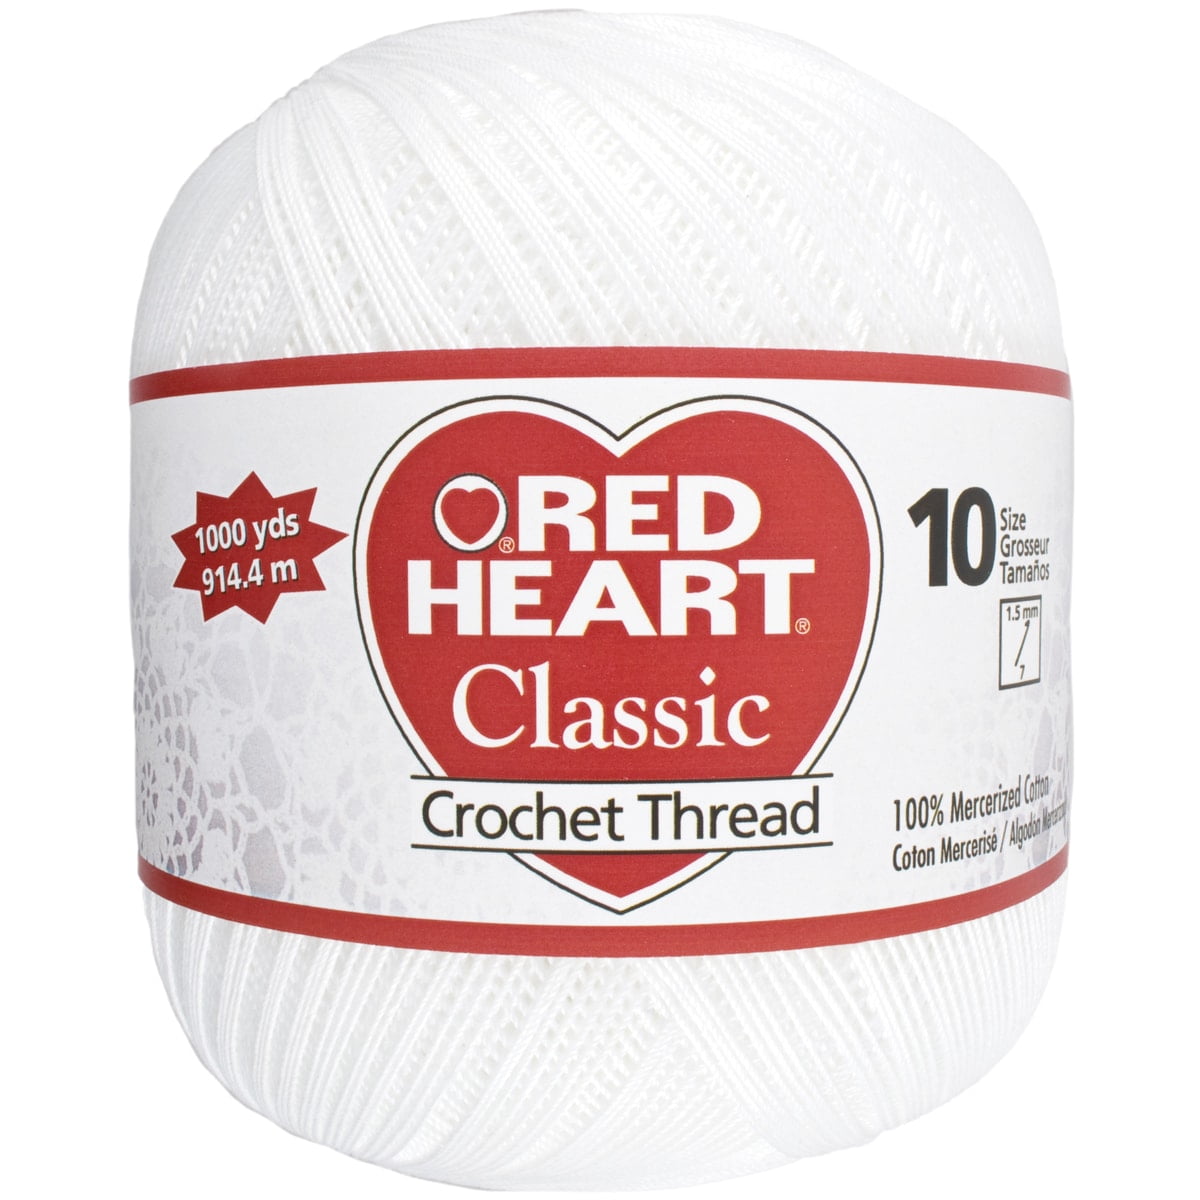 3-Pack - Aunt Lydia's Classic Crochet Thread - Natural - Size 10 Value Pack  - 1000 Yards Each